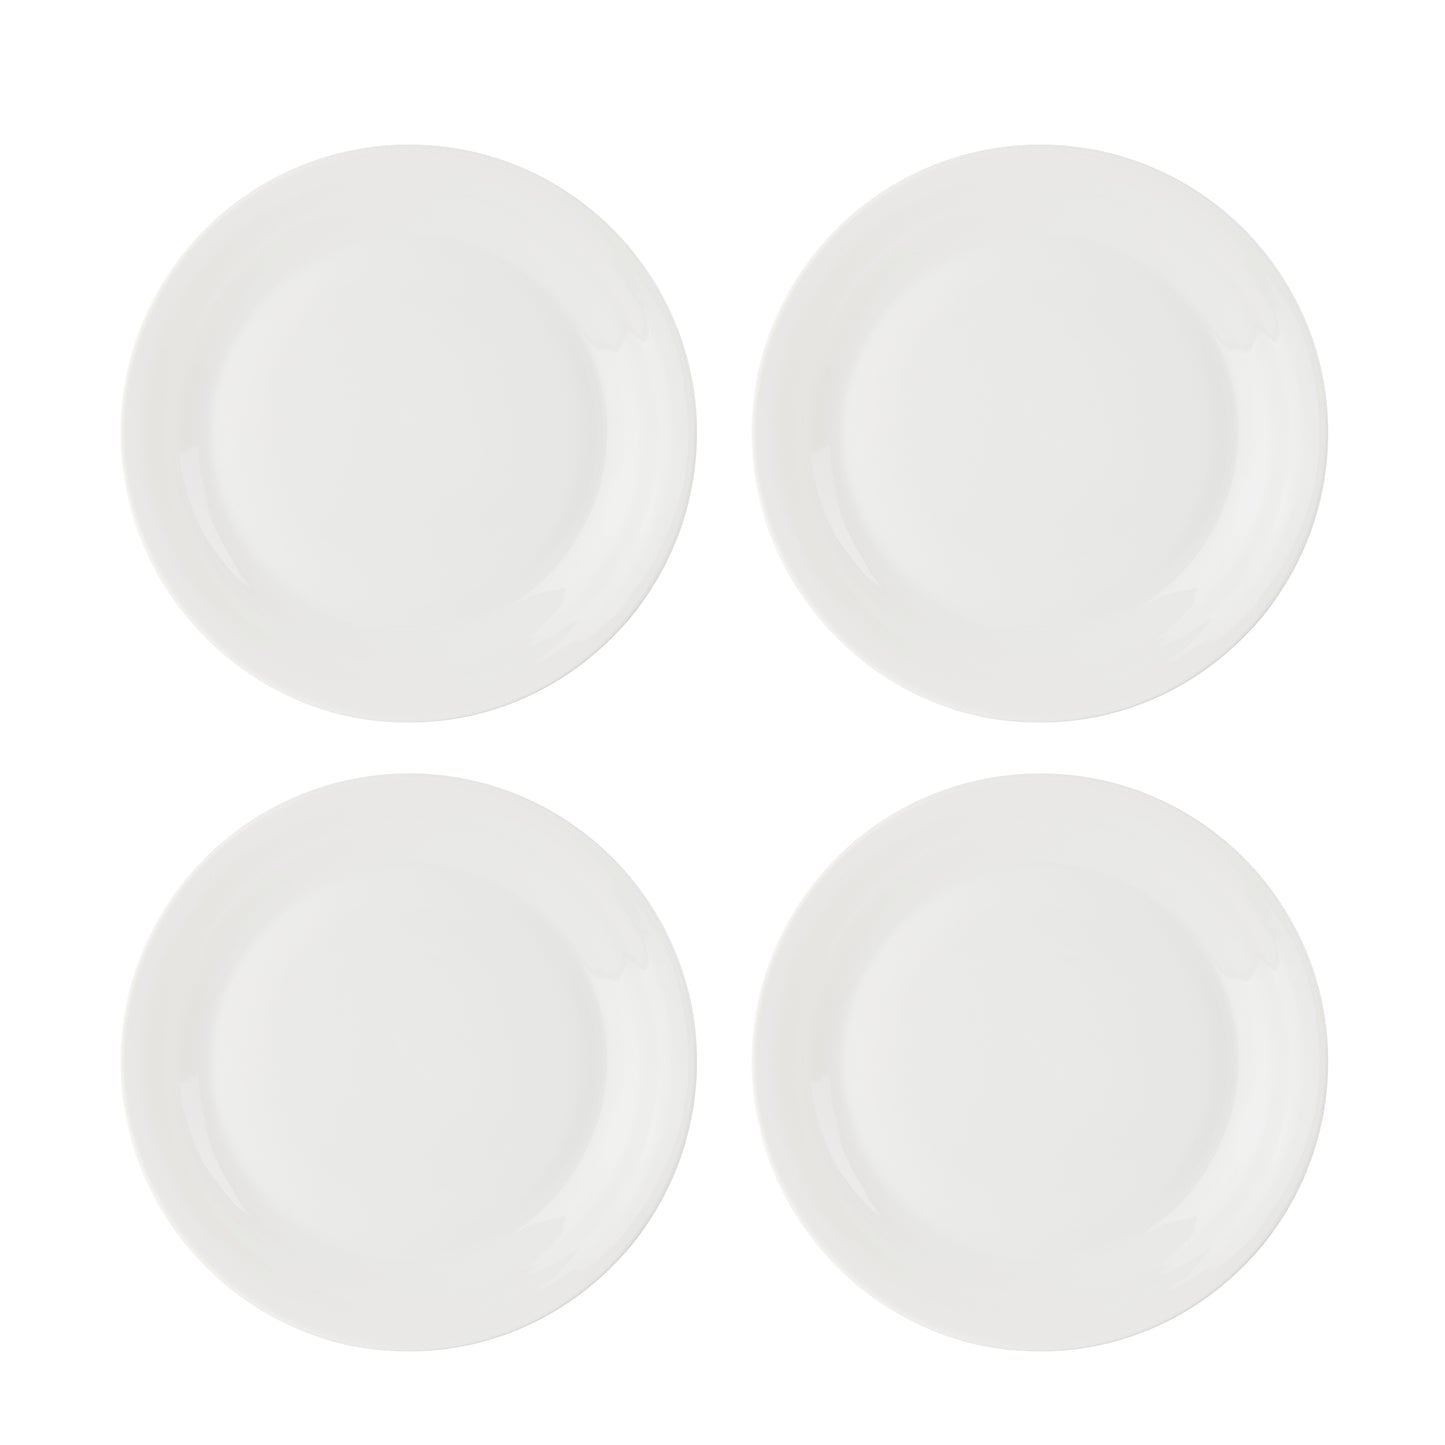 Royal Doulton 1815 Pure Dinner Plate (Set of 4)